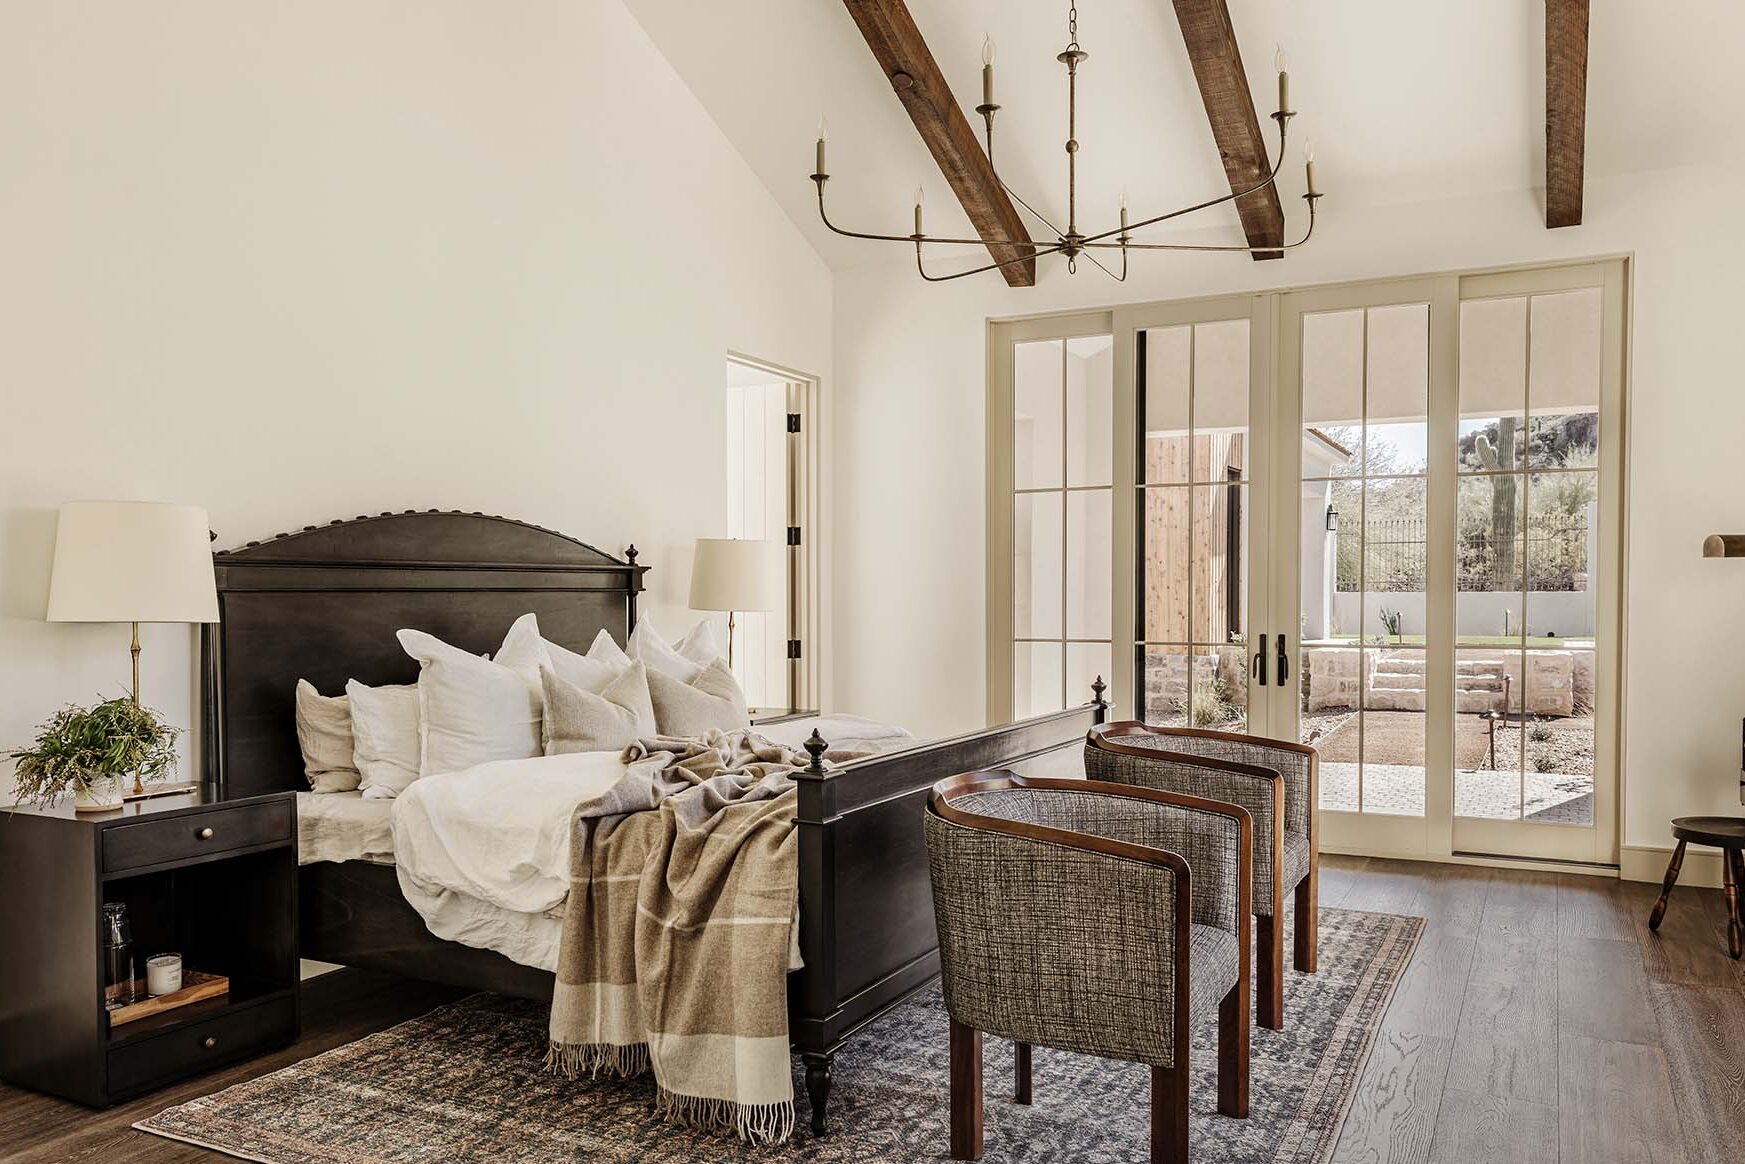 English Country by Modern Nest | English Country Primary Bedroom | Bedroom Decor | Luxury Bedroom |  Scottsdale, Arizona Home Build | Market by Modern Nest | Modern Nest | Scottsdale, AZ | Design, Build, Furnish